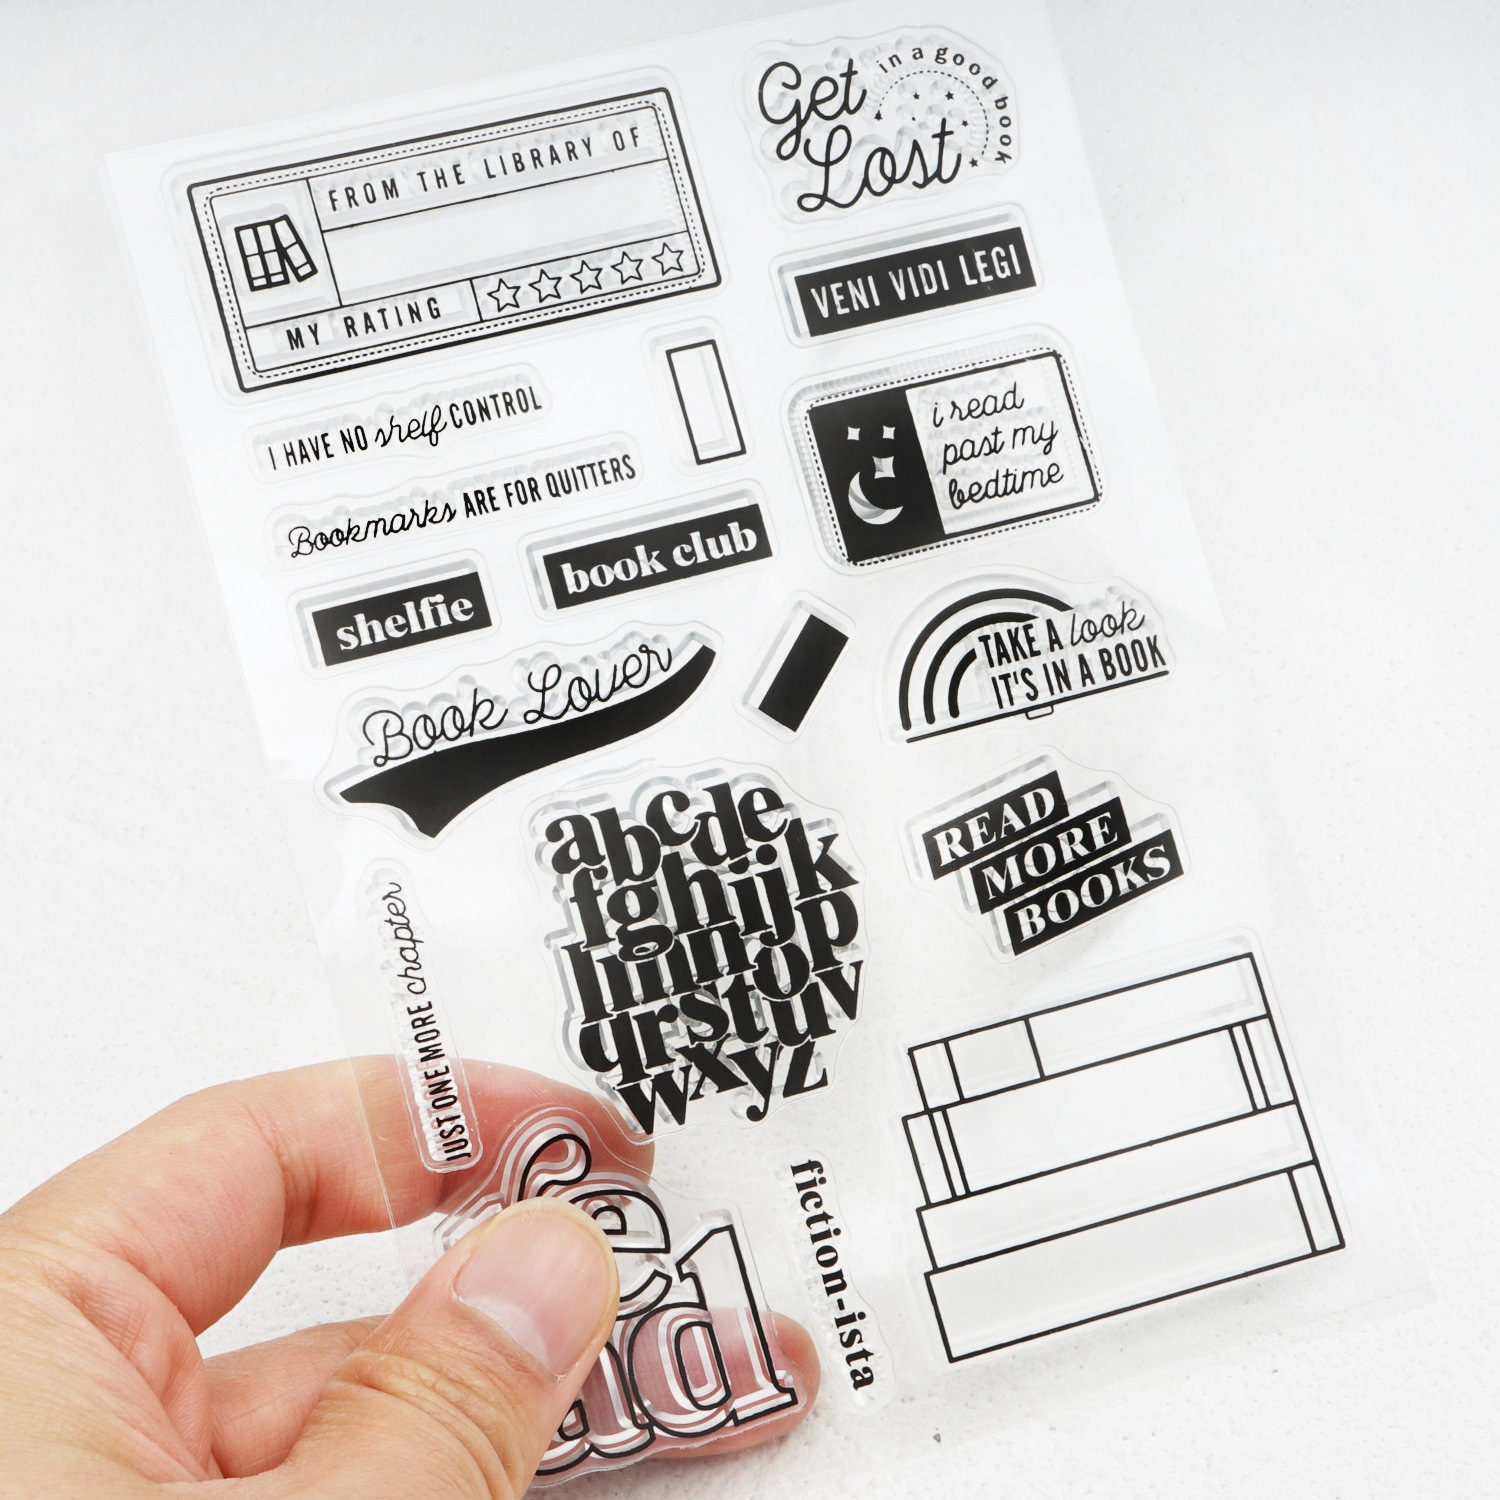 Acrylic Stamp Block, Stamping Block for Clear Rubber Stamps Grid